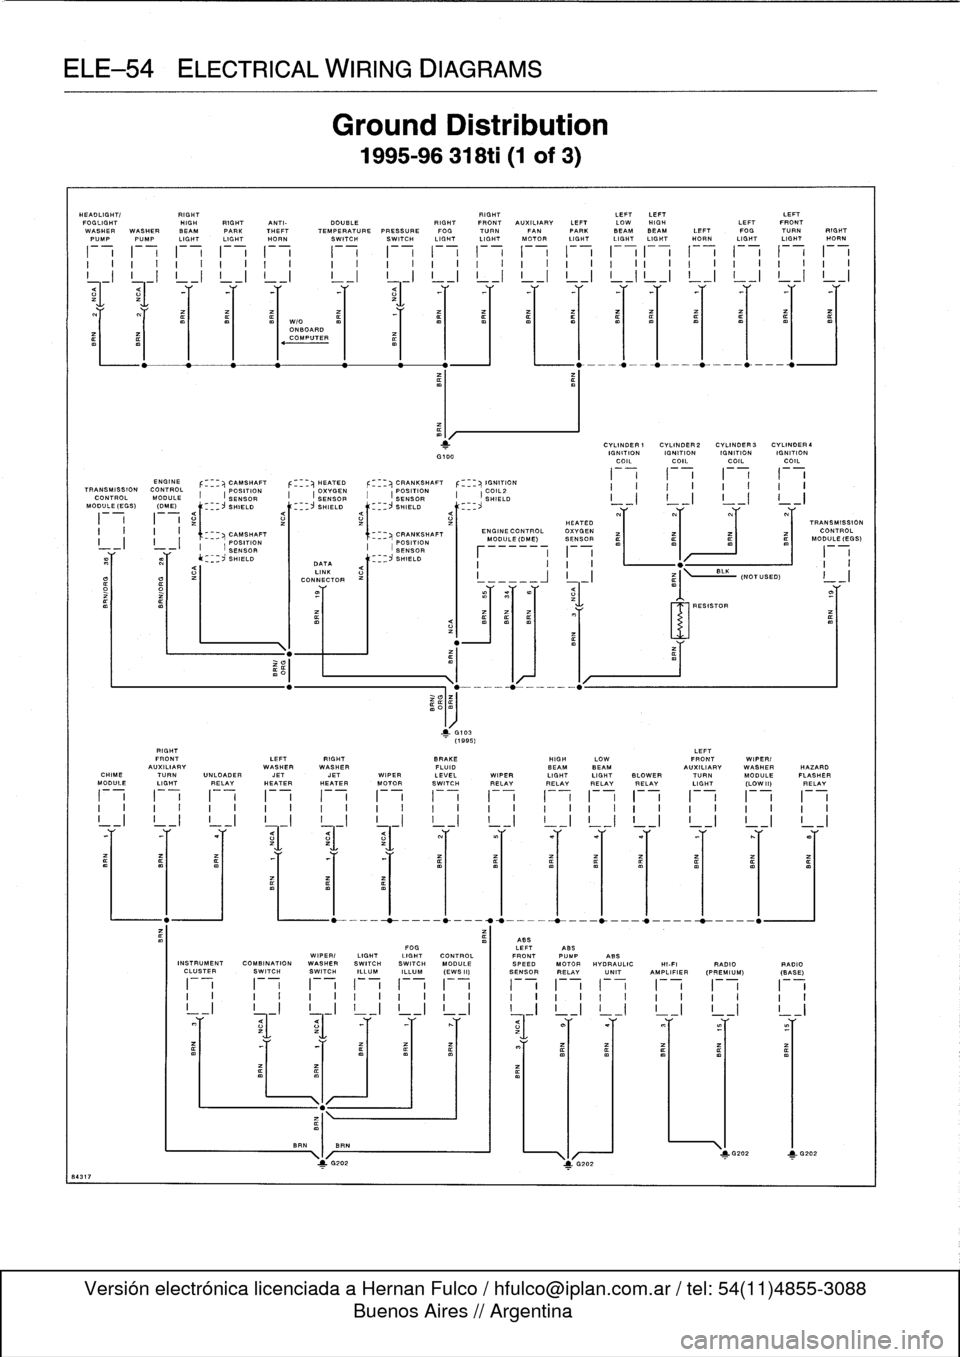 BMW 318i 1997 E36 Manual PDF 
ELE-54
ELECTRICAL
WIRING
DIAGRAMS

HEADLIGHT/

	

RIGHT

	

RIGHT

	

LEFTLEFT

	

LEFT
FOGLIGHT

	

HIGH
RIGHT
ANTI-

	

DOUBLE

	

RIGHT
FRONT
AUXILIARY
LEFT
LOW
HIGH

	

LEFT
FRONT
WASHER
WASHER
B